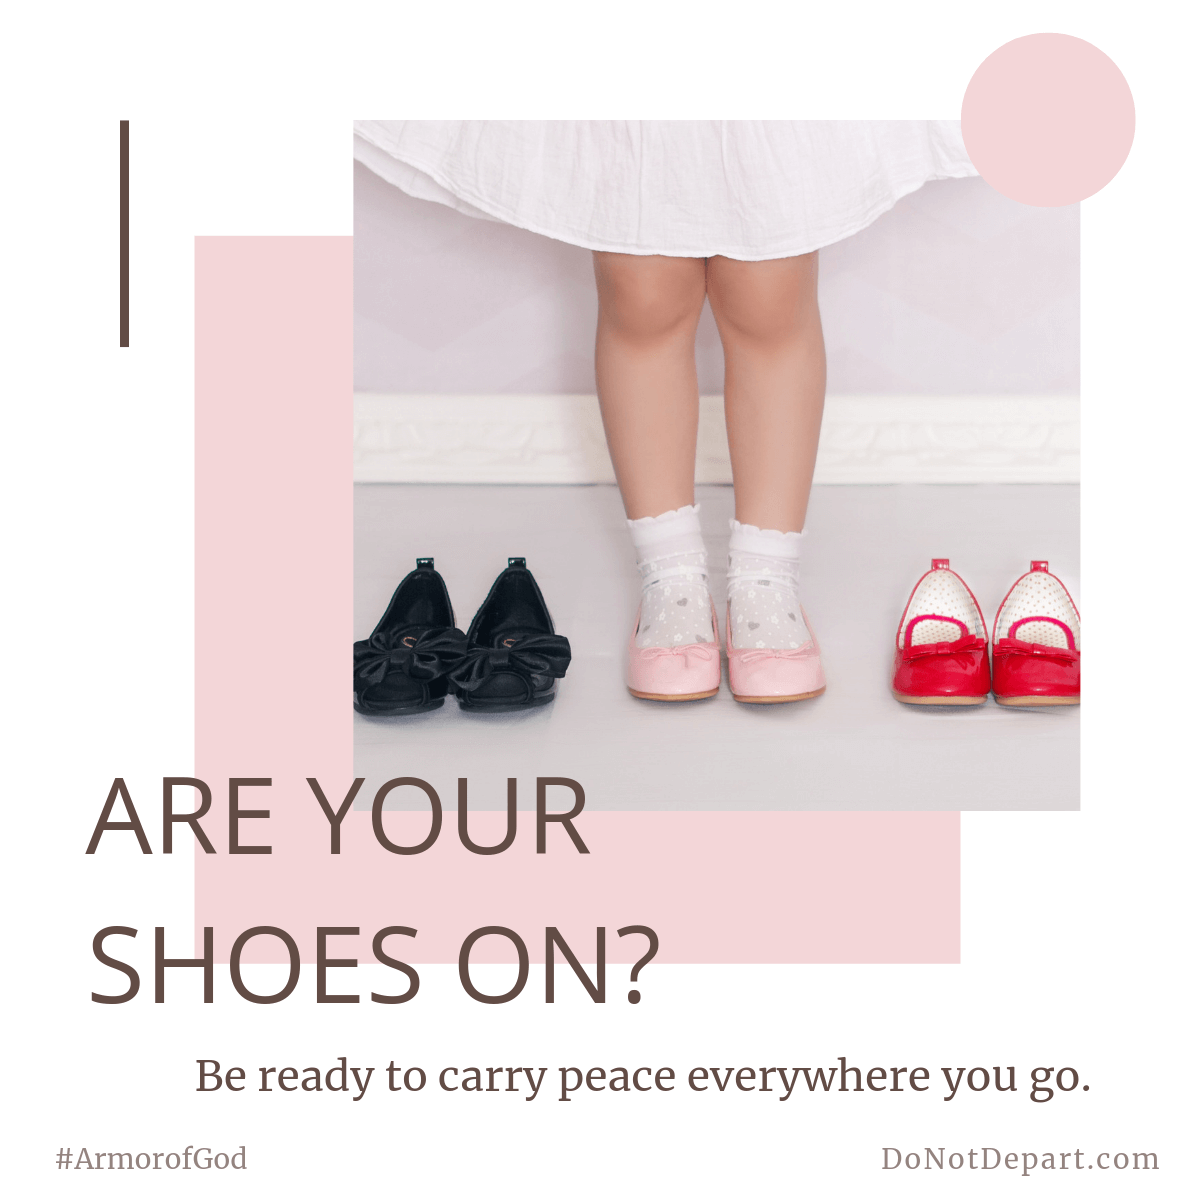 Are Your Shoes On? Carry Peace